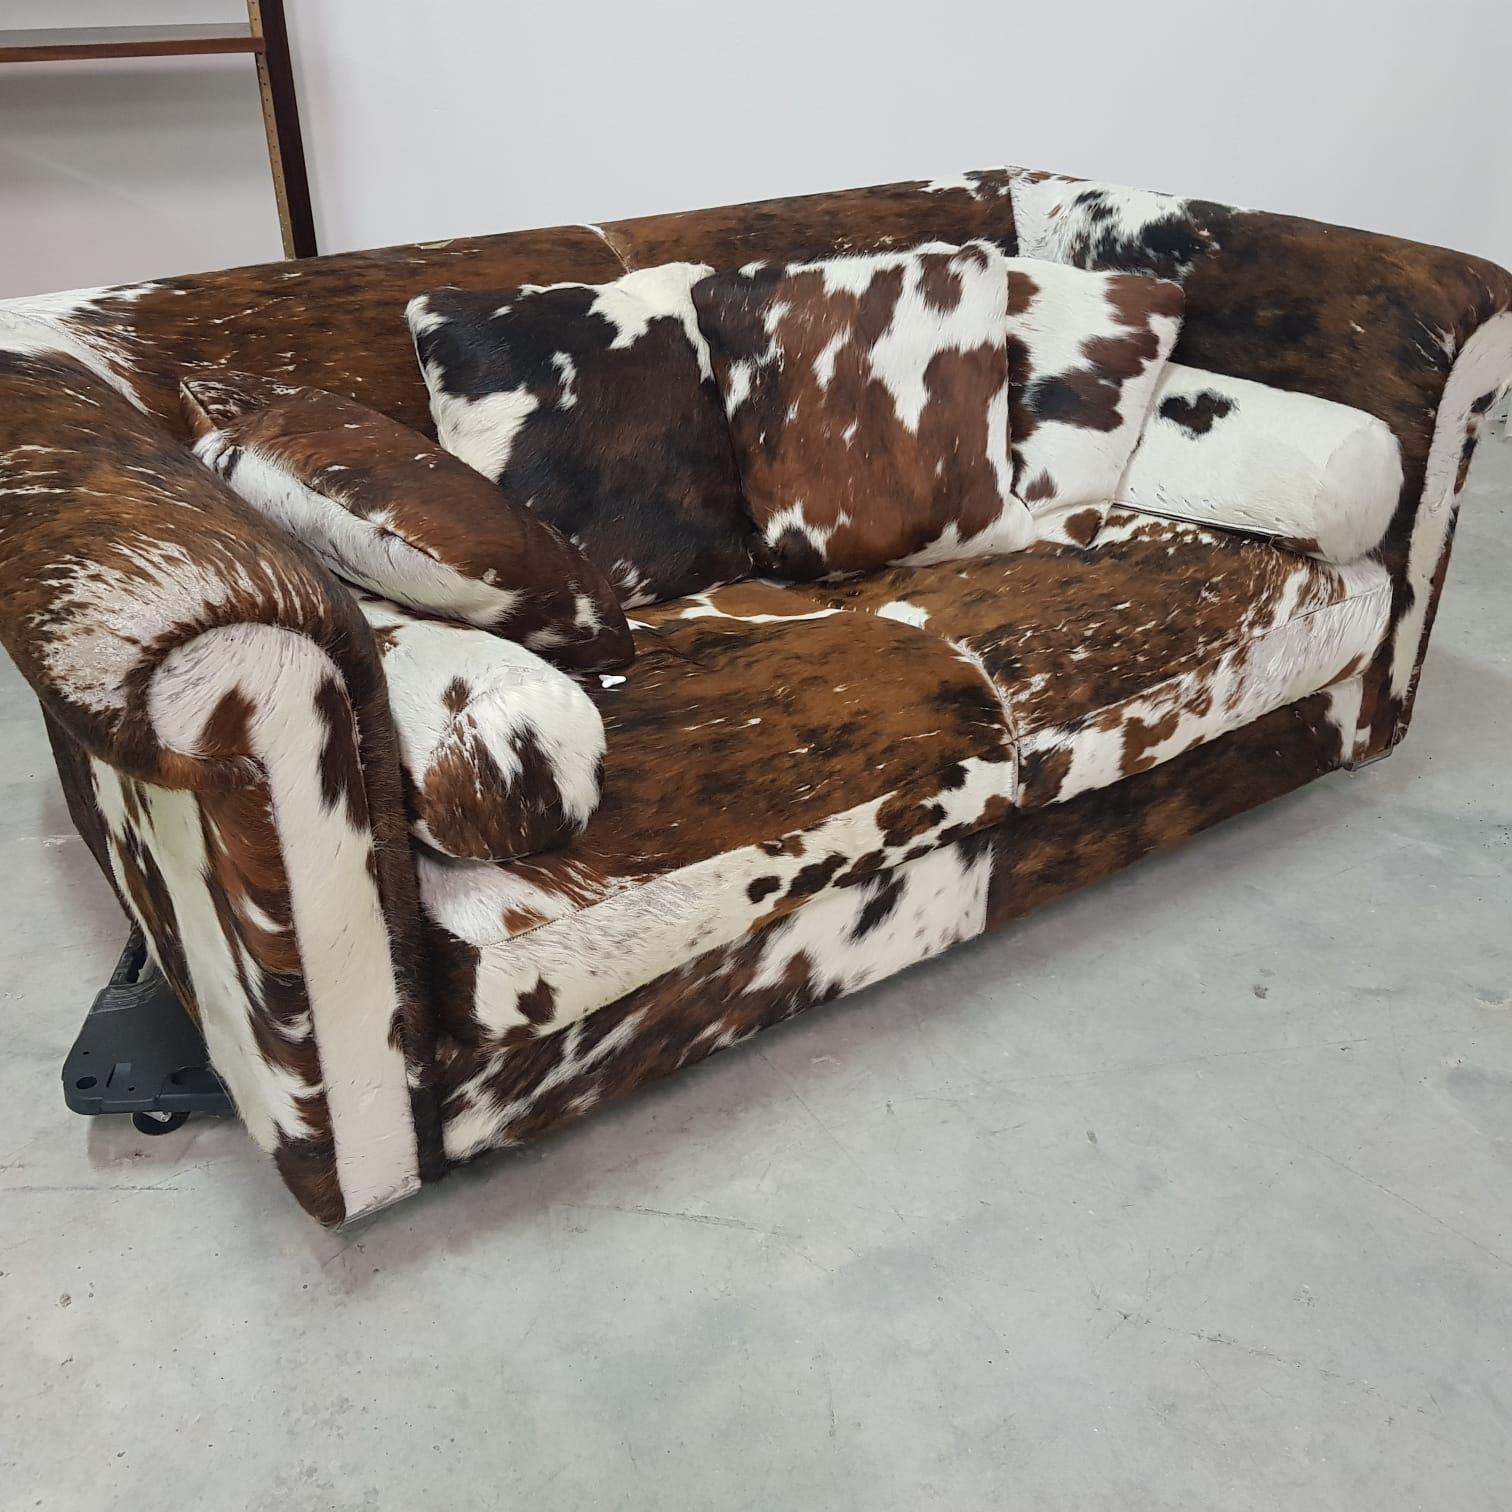 Baxter Brown and White Cow Fur Leather Sofa with Pillows, Italy, 1990s For Sale 10